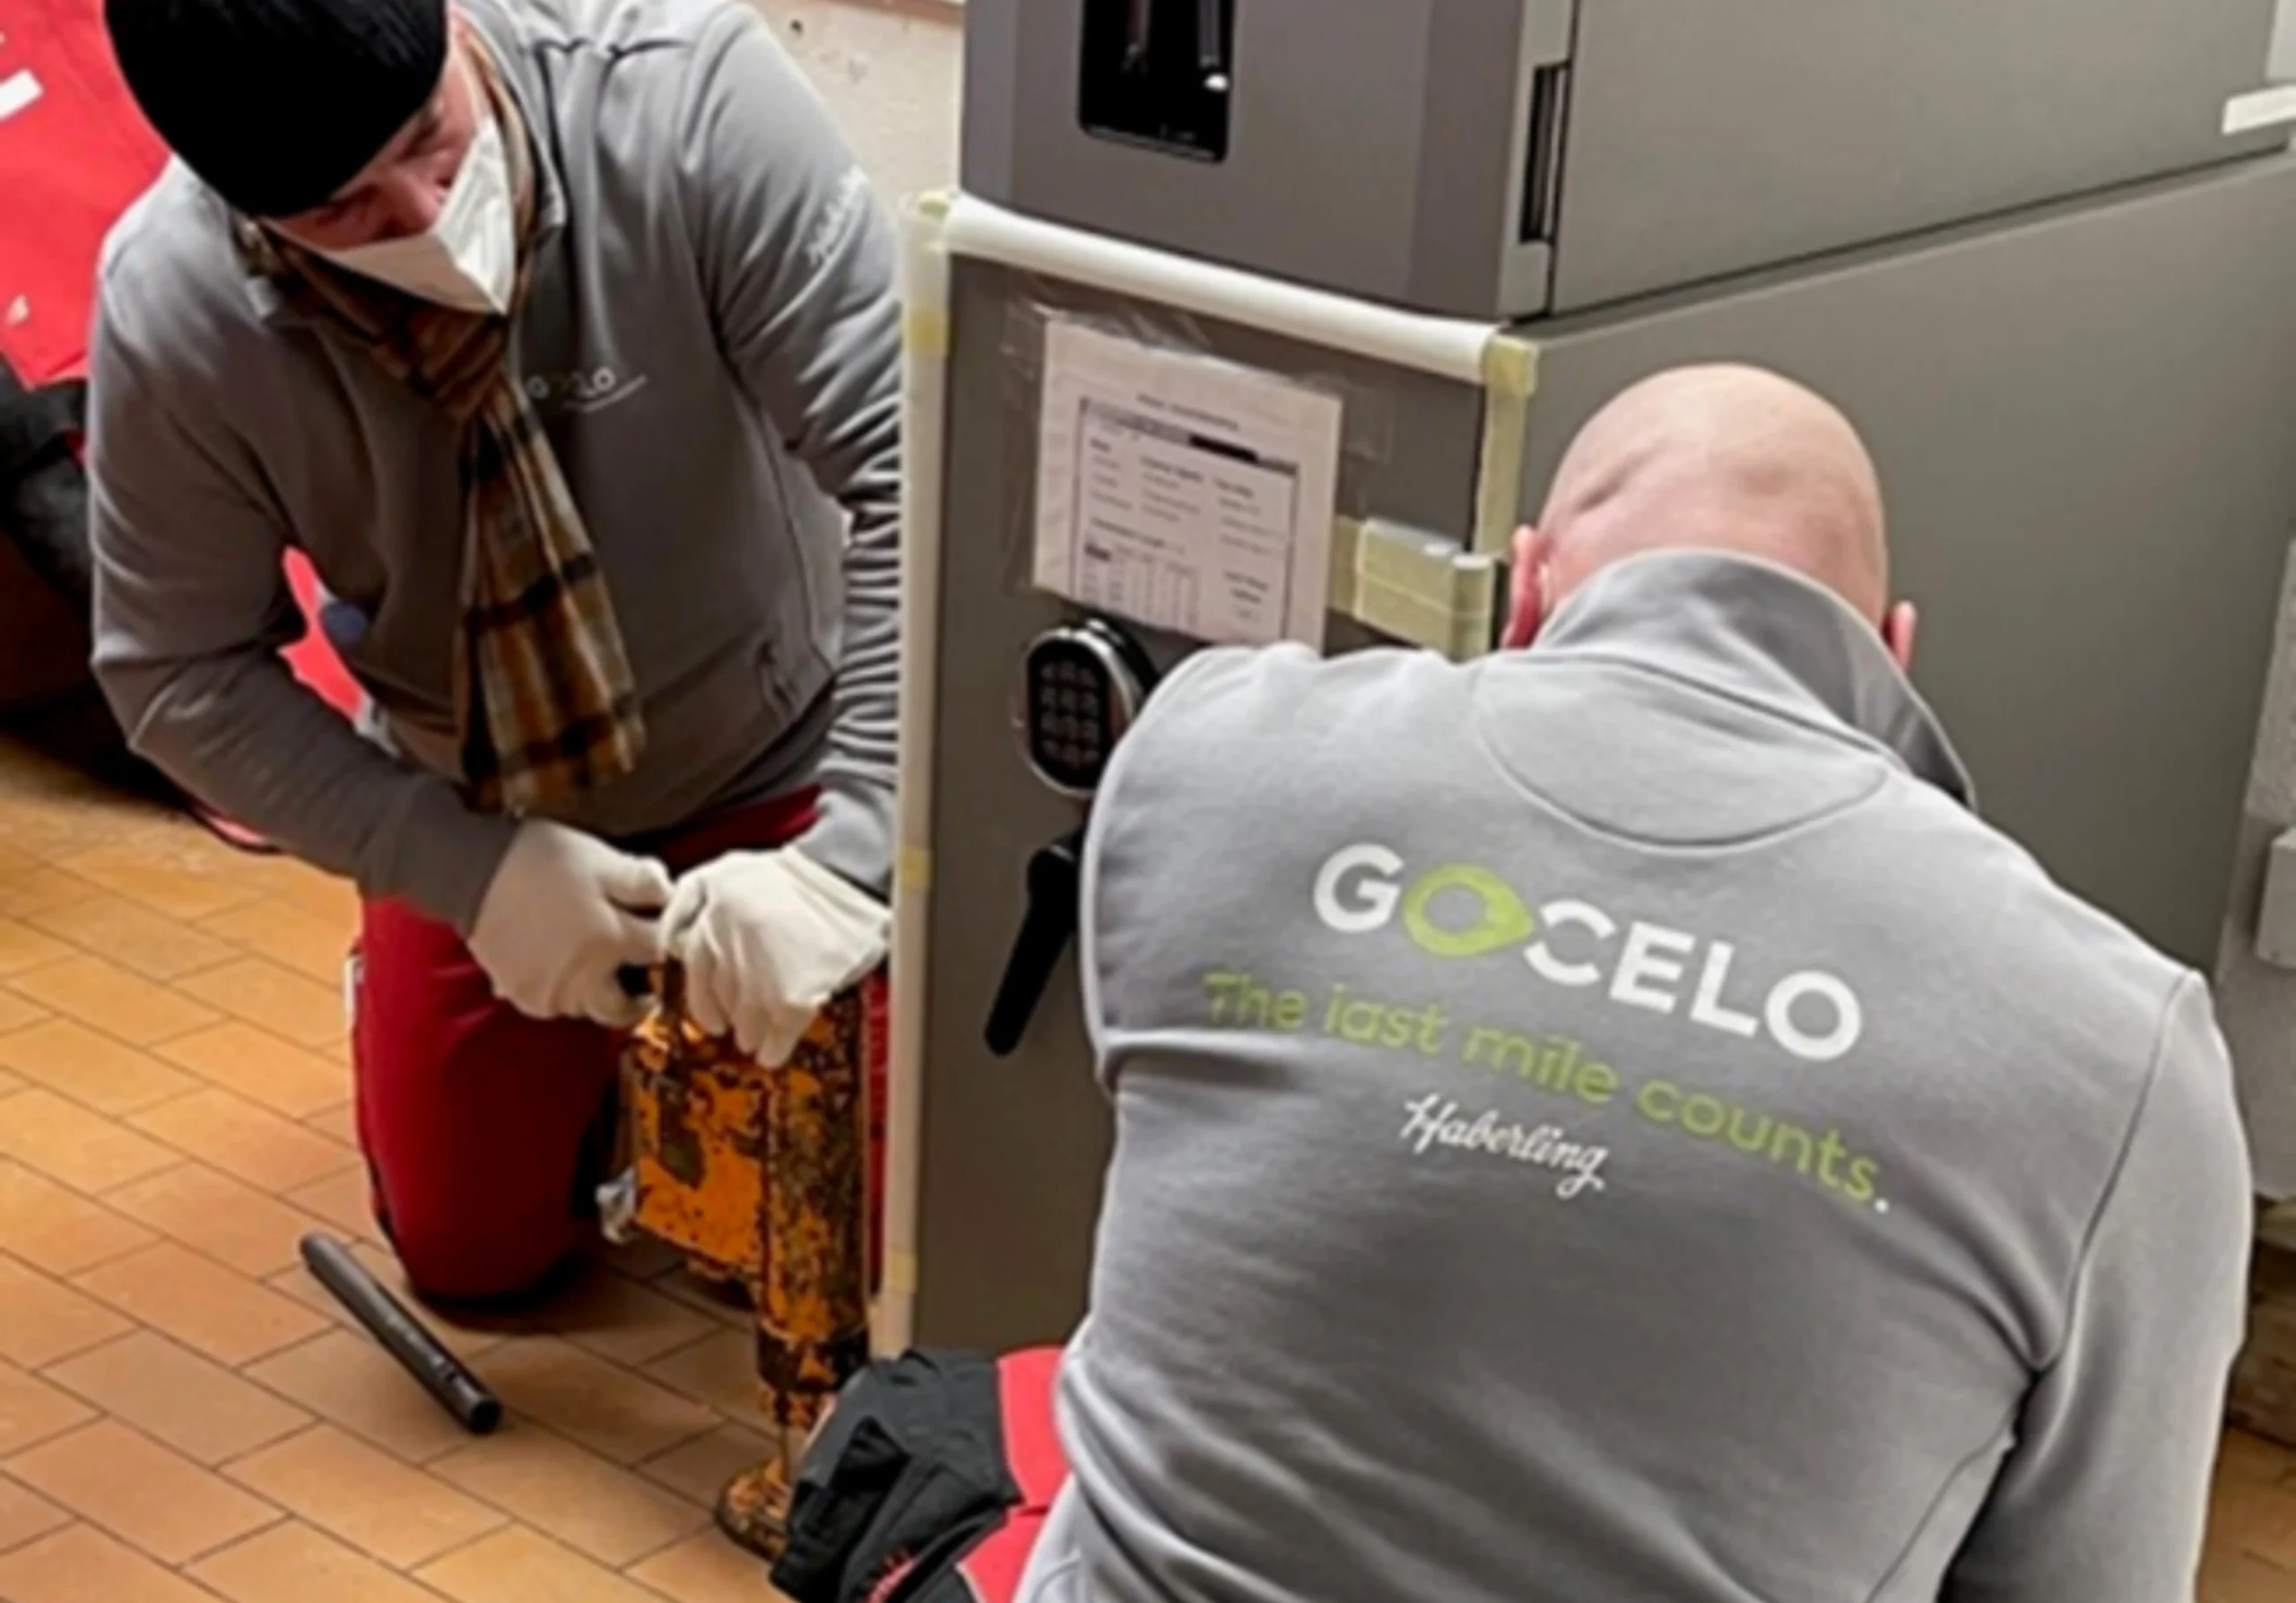 GOCELO's aim is to continuously improve customer service by providing additional support in the final stages of the delivery process. One such additional service is the Last Mile Helping Hand Services.